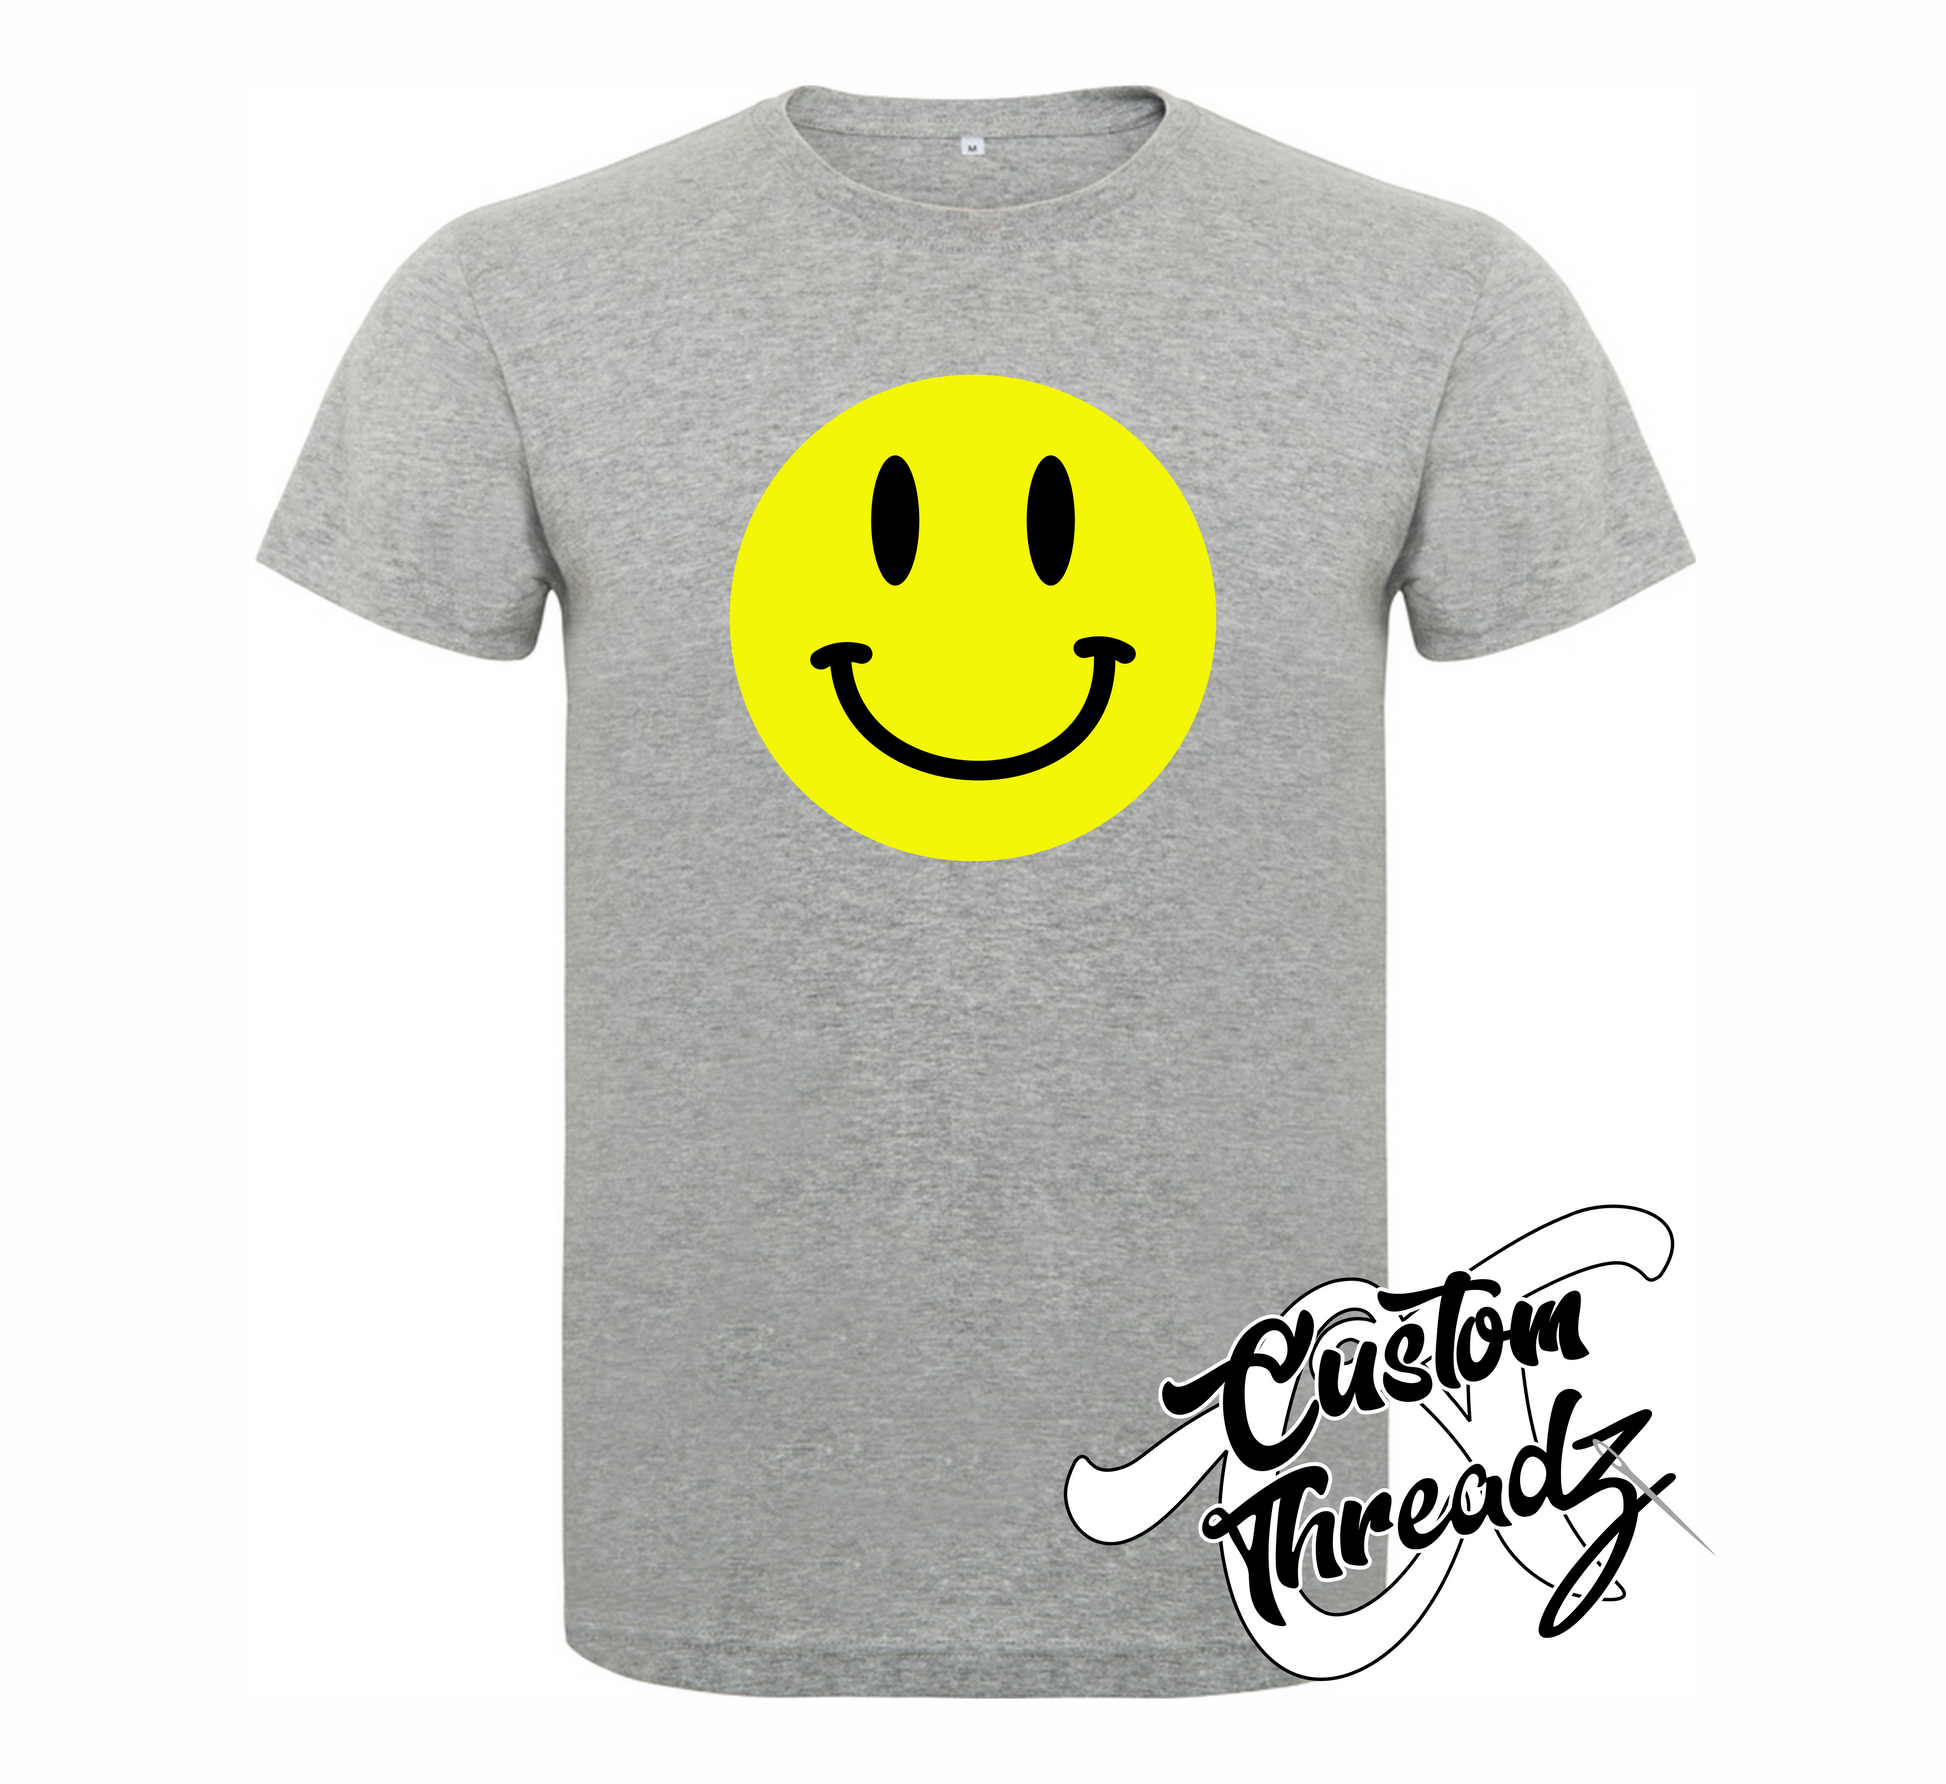 athletic heather grey tee with smiley face DTG printed design